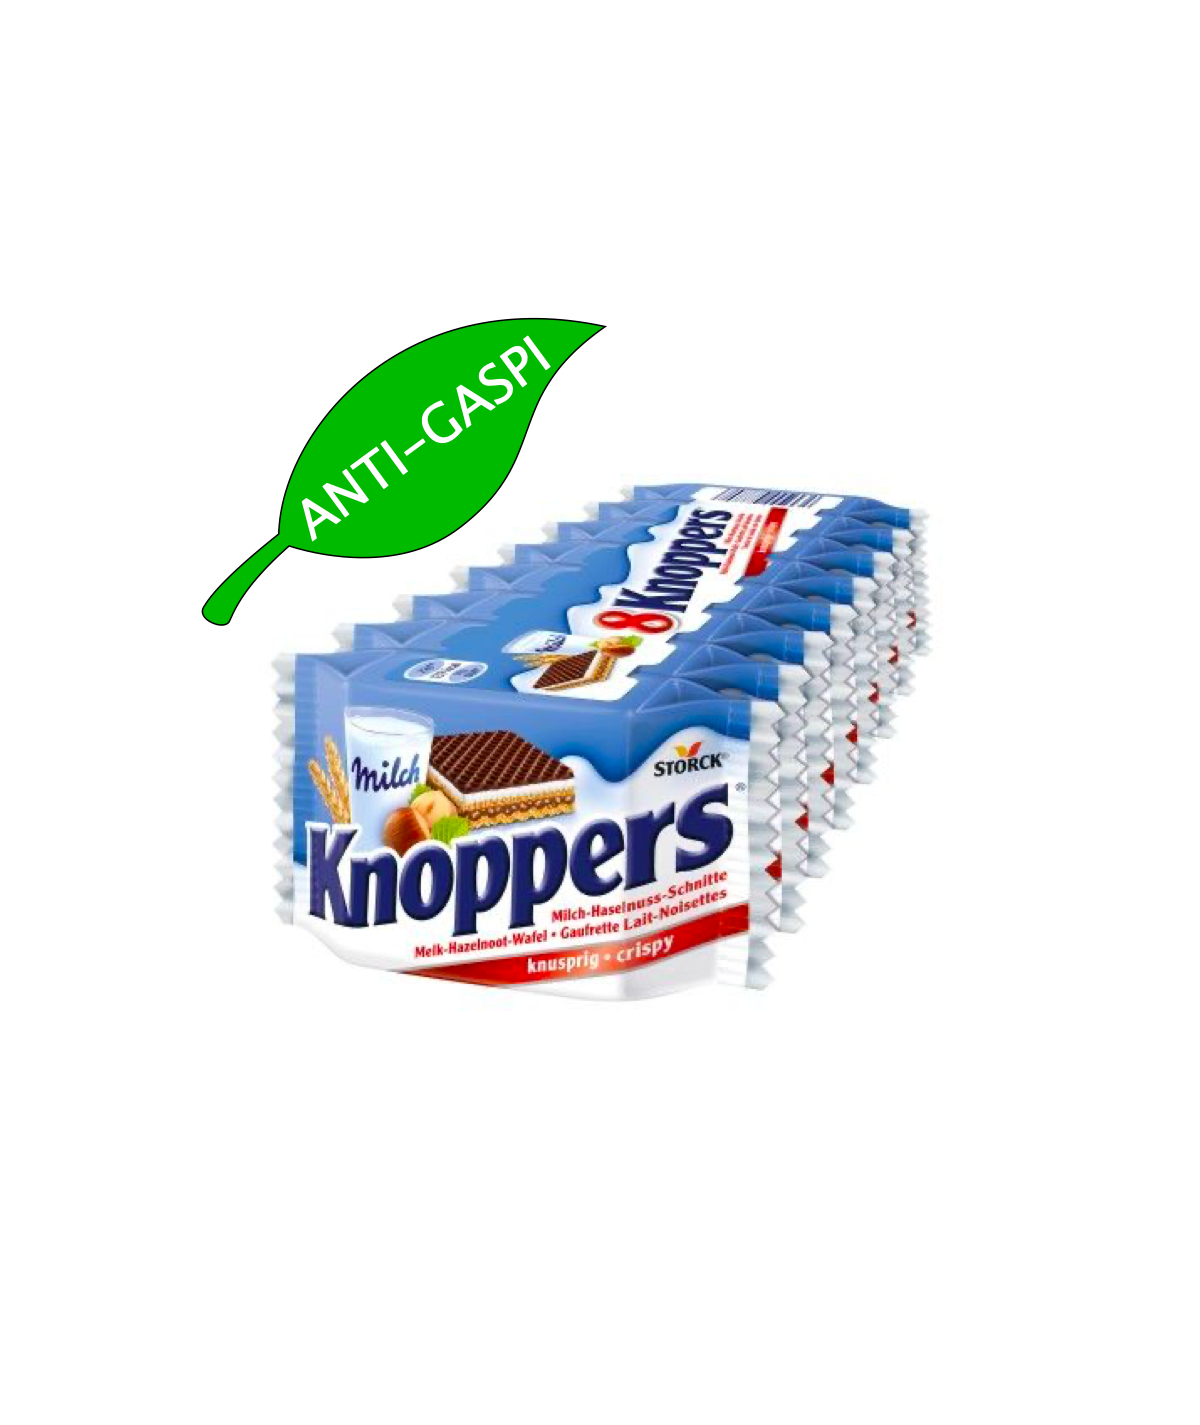 Knoppers x8 - 200g